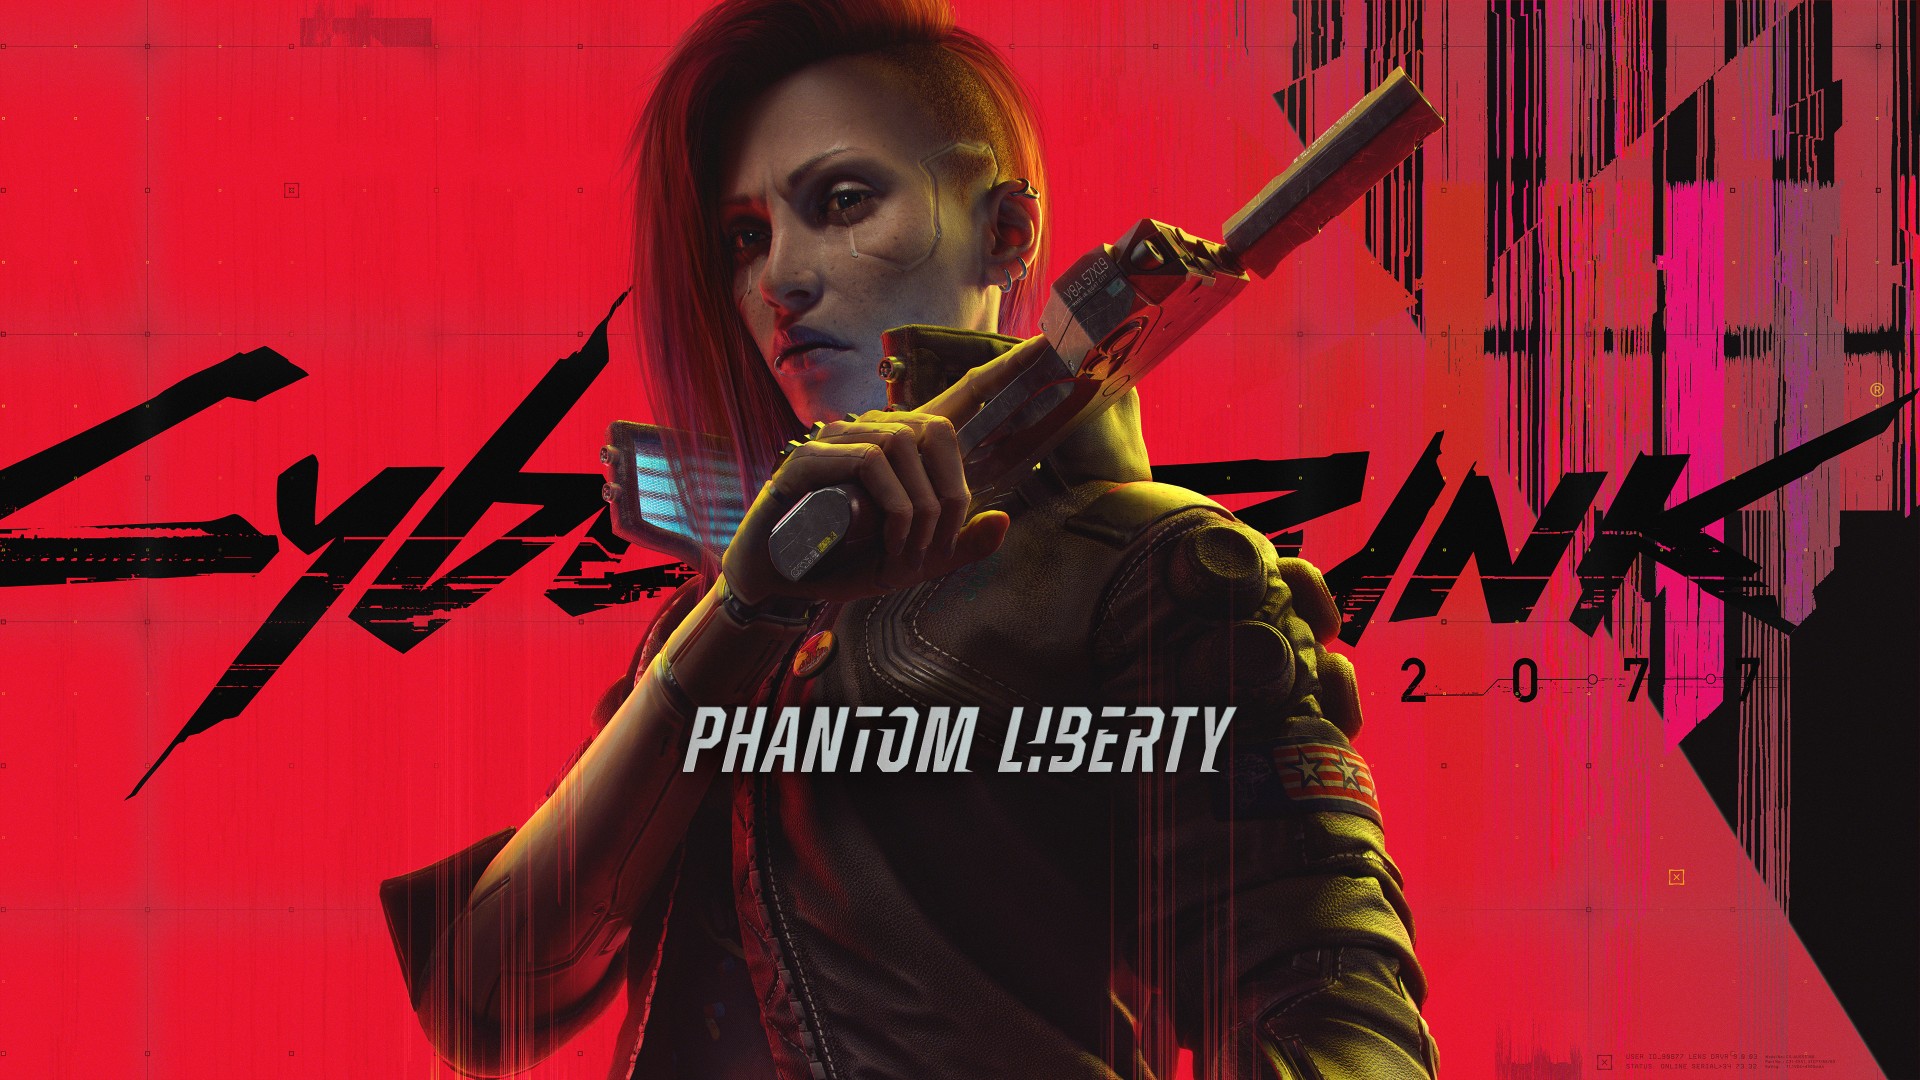 Cyberpunk 2077: Phantom Liberty reaches 4.3 million copies sold as CD Projekt RED ramps up development on the next Witcher game